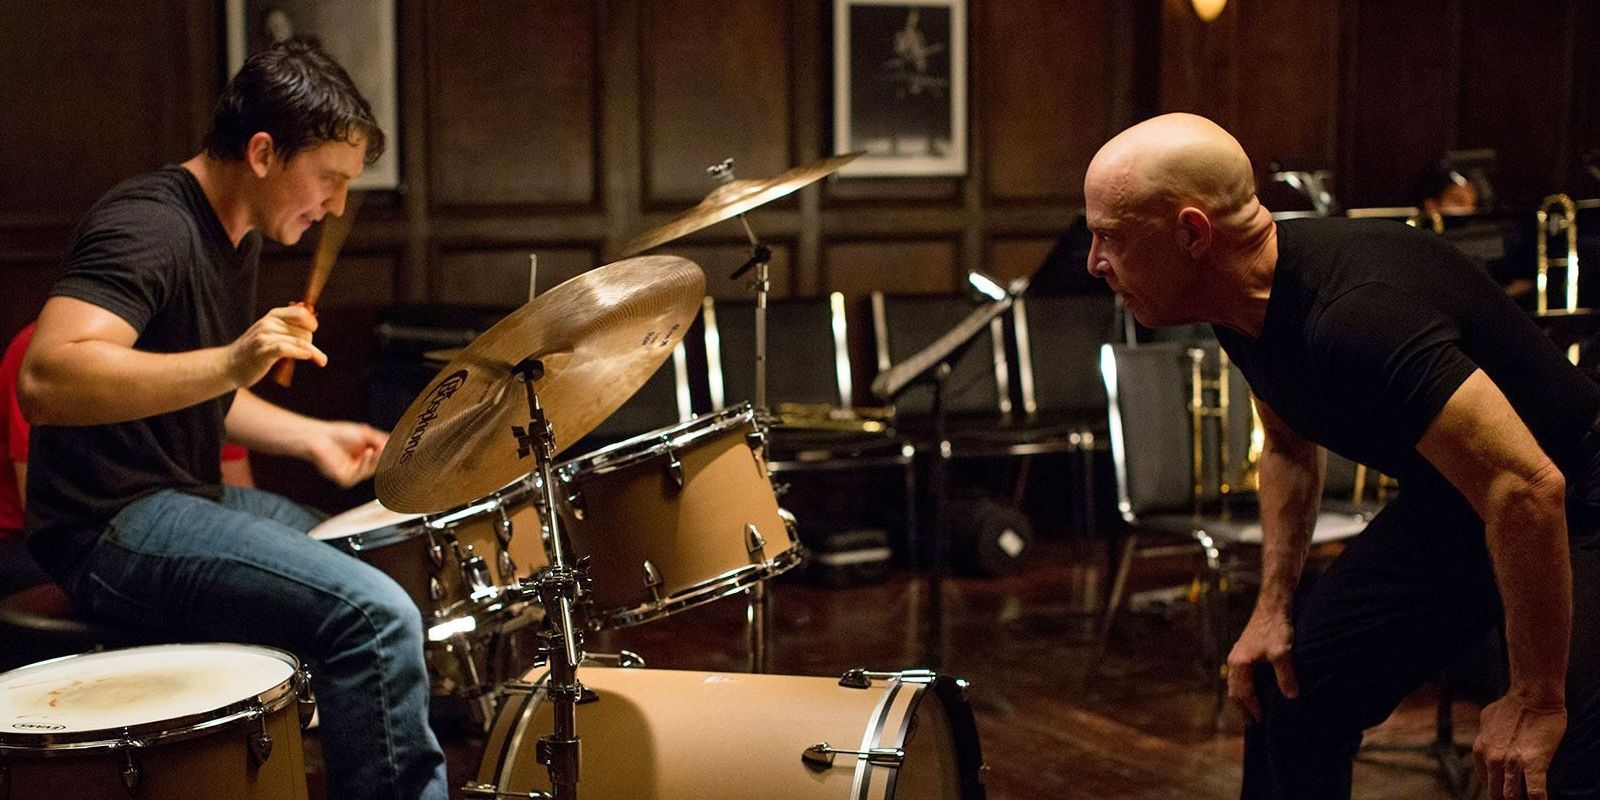 Andrew plays the drums under Fletcher's supervision in Whiplash